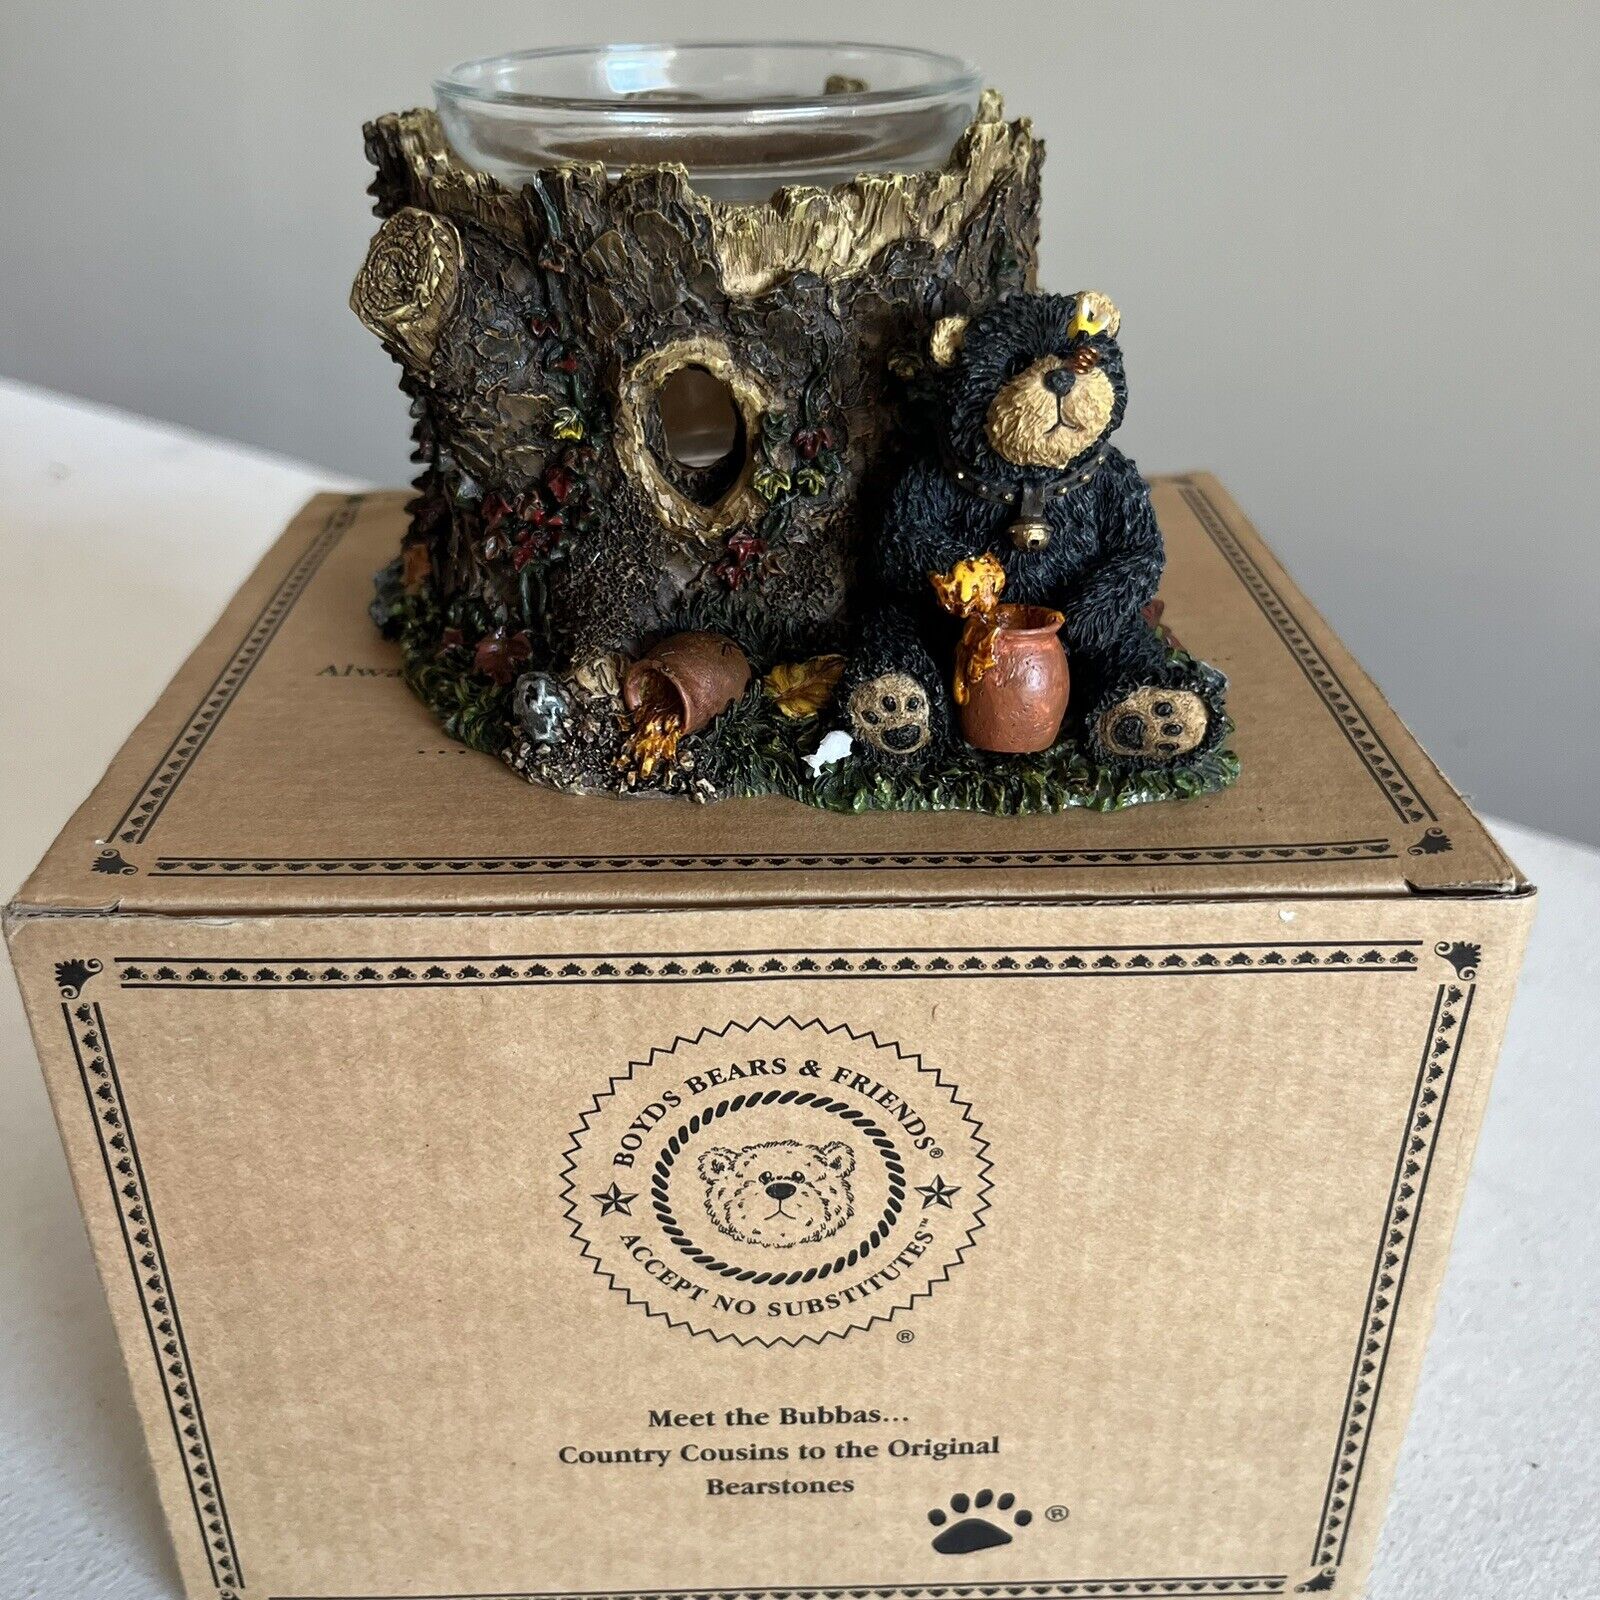 Boyds Bears Bubba Resin Figure. With Box. Glass Holder